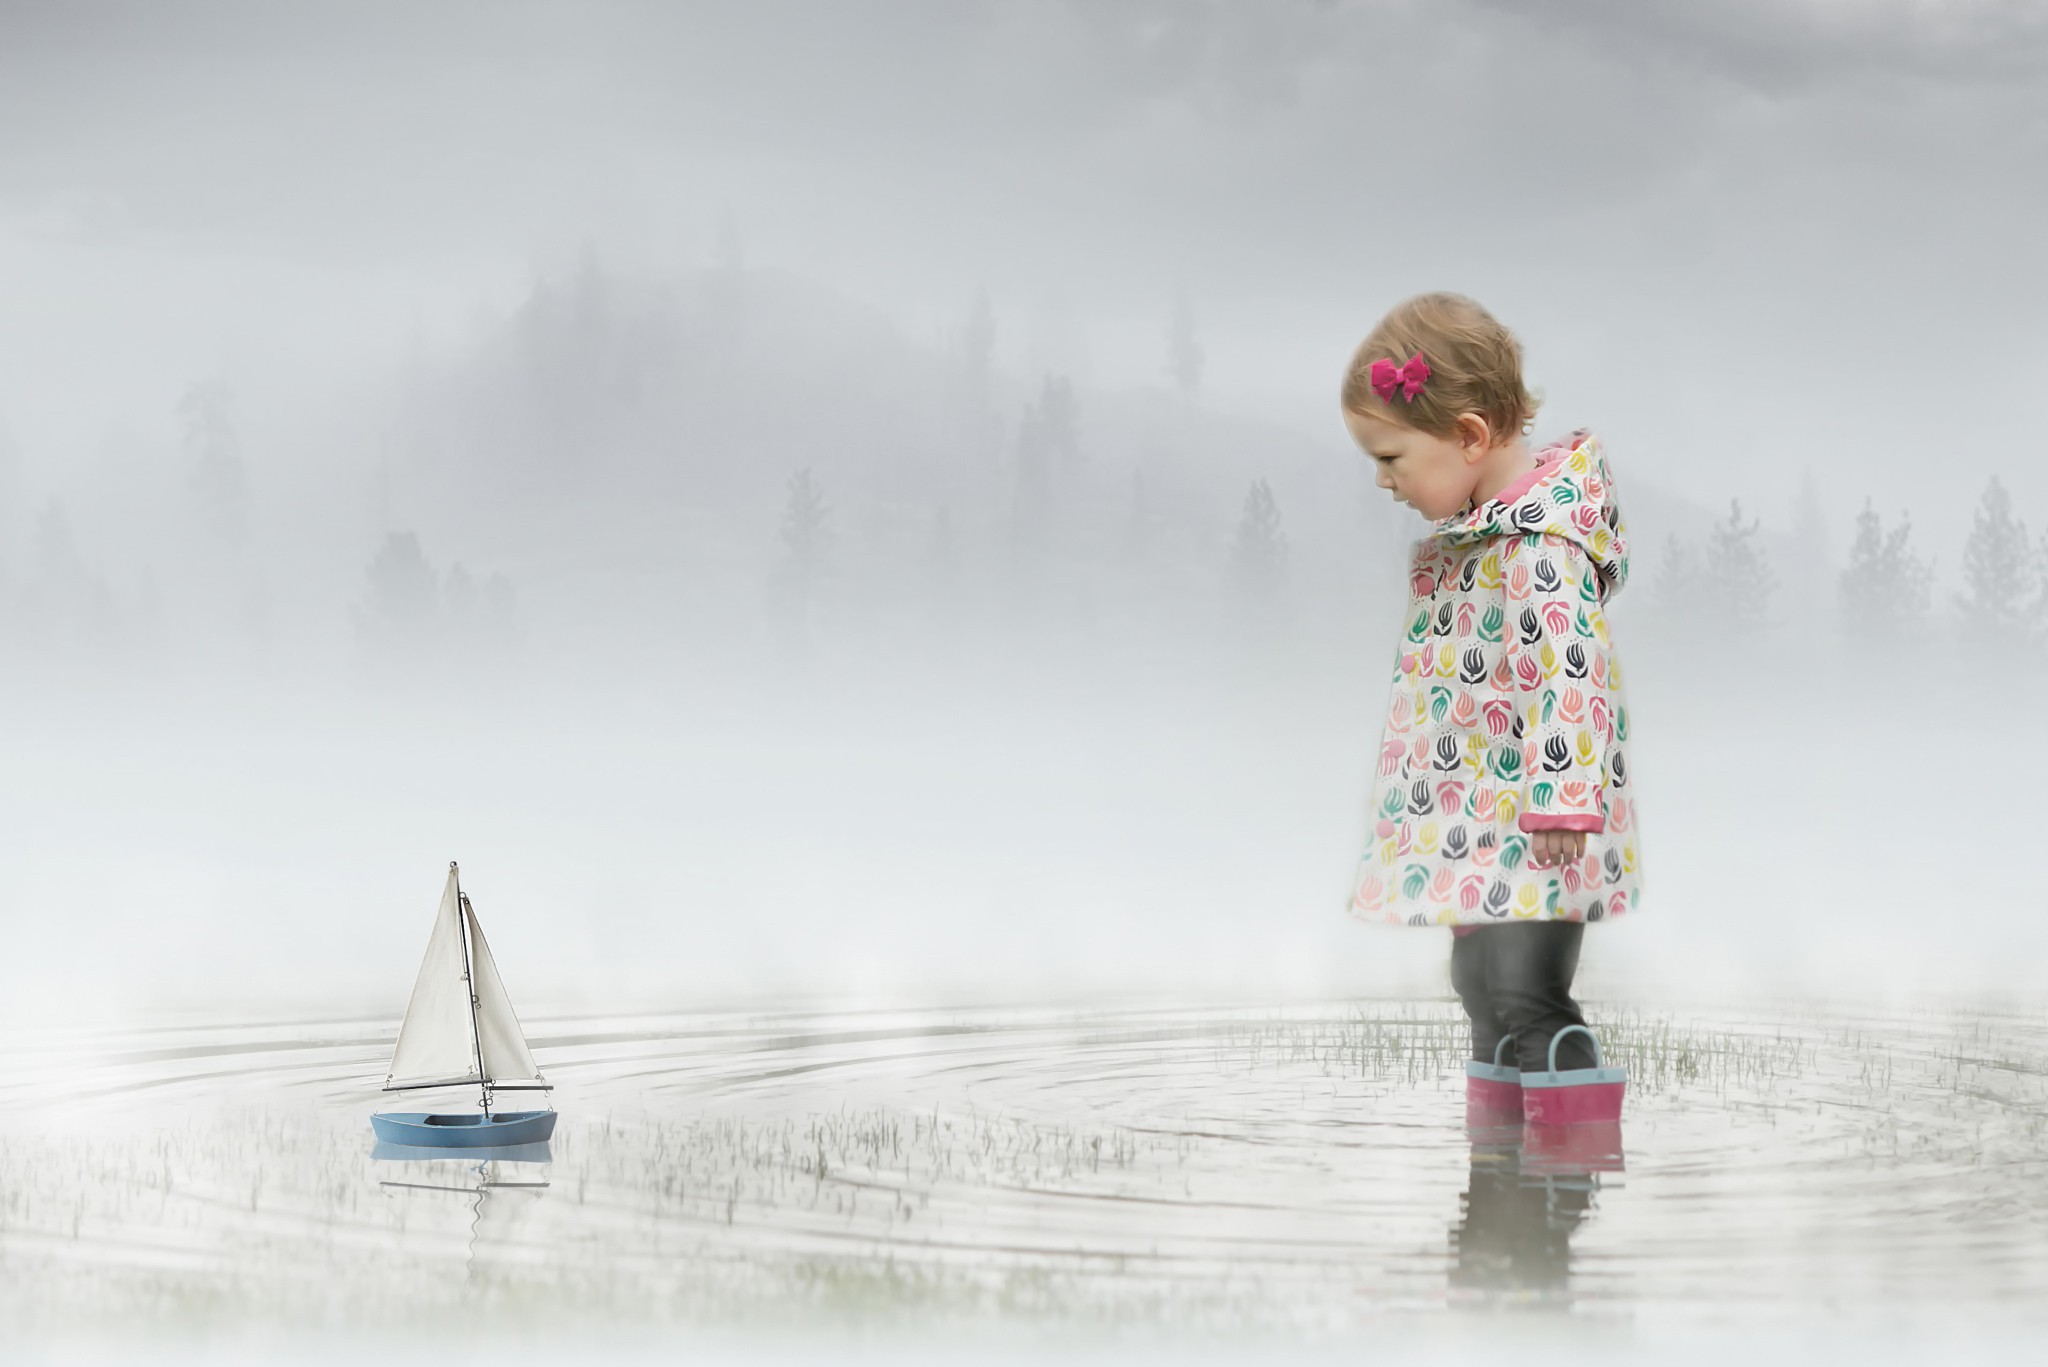 little misty girl waters ship free awesome image for mobile